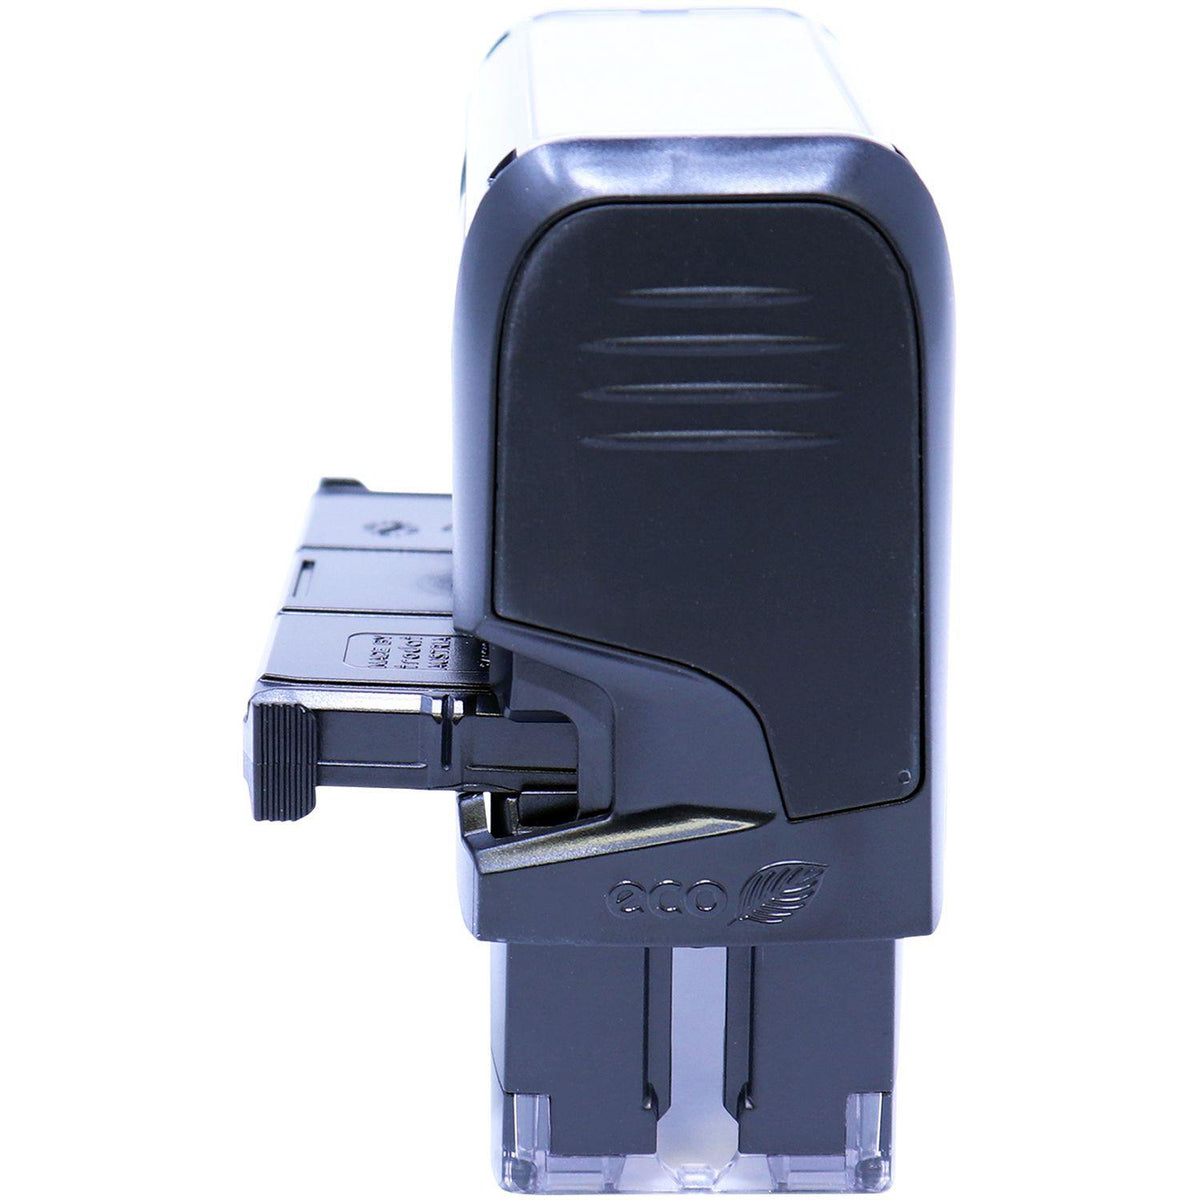 Self Inking Distributed Stamp With A Line - Engineer Seal Stamps - Brand_Trodat, Impression Size_Small, Stamp Type_Self-Inking Stamp, Type of Use_Business